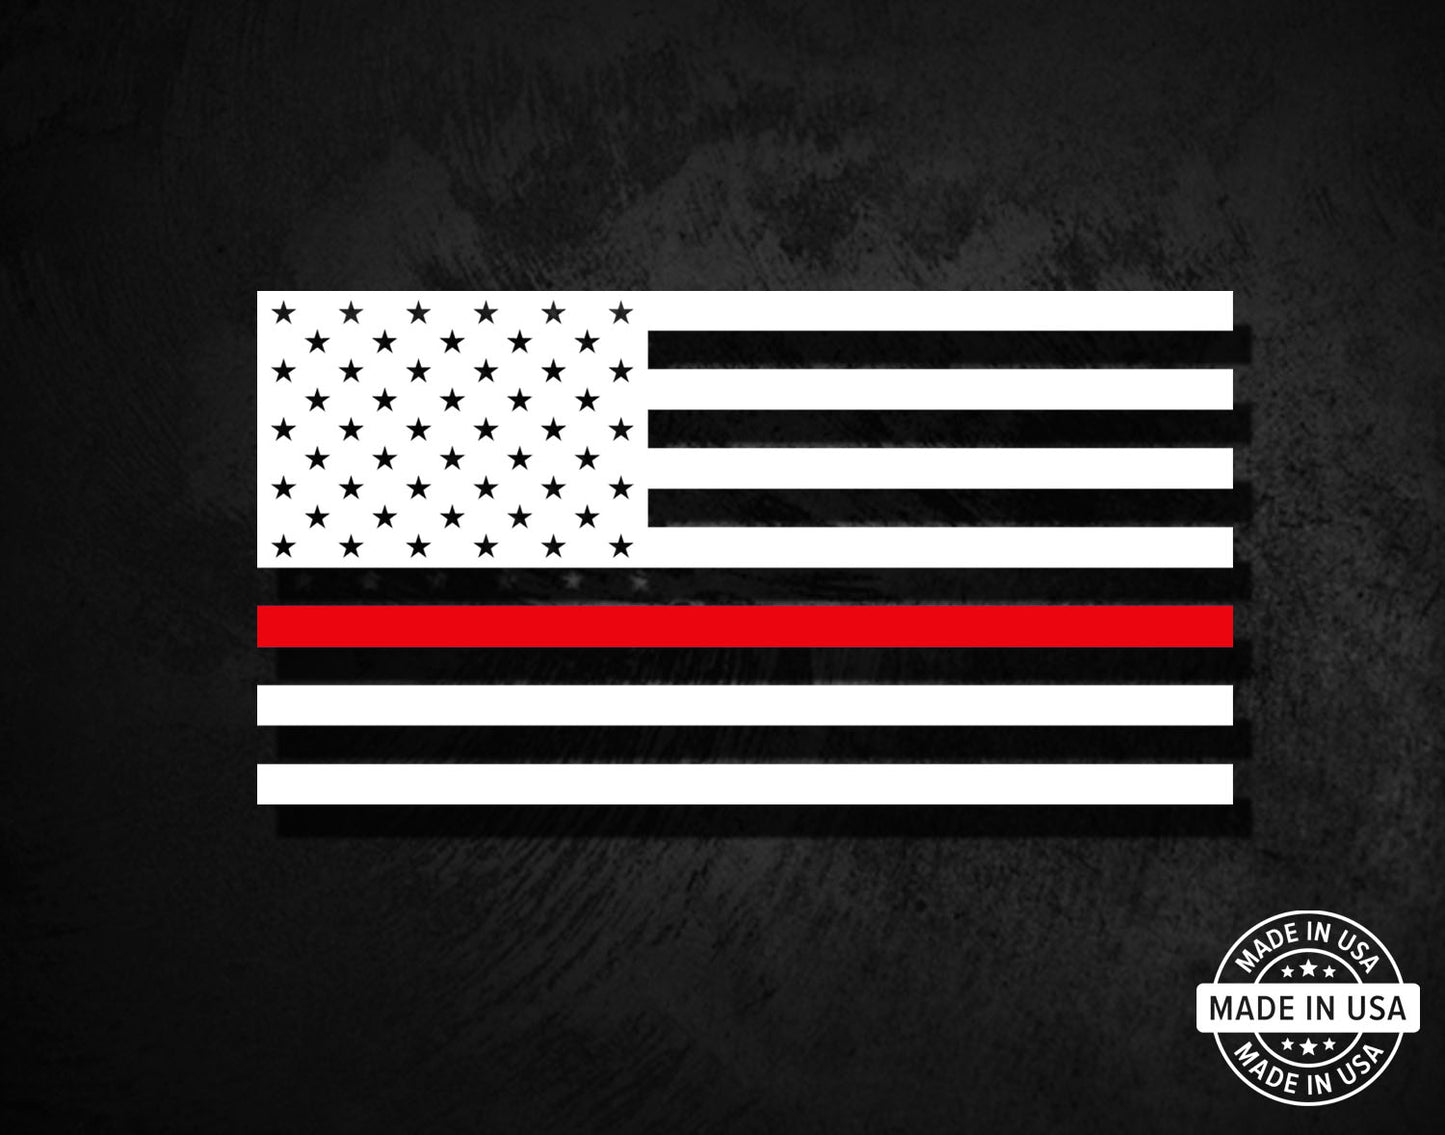 Thin Red Line (solid union) Flag Decal